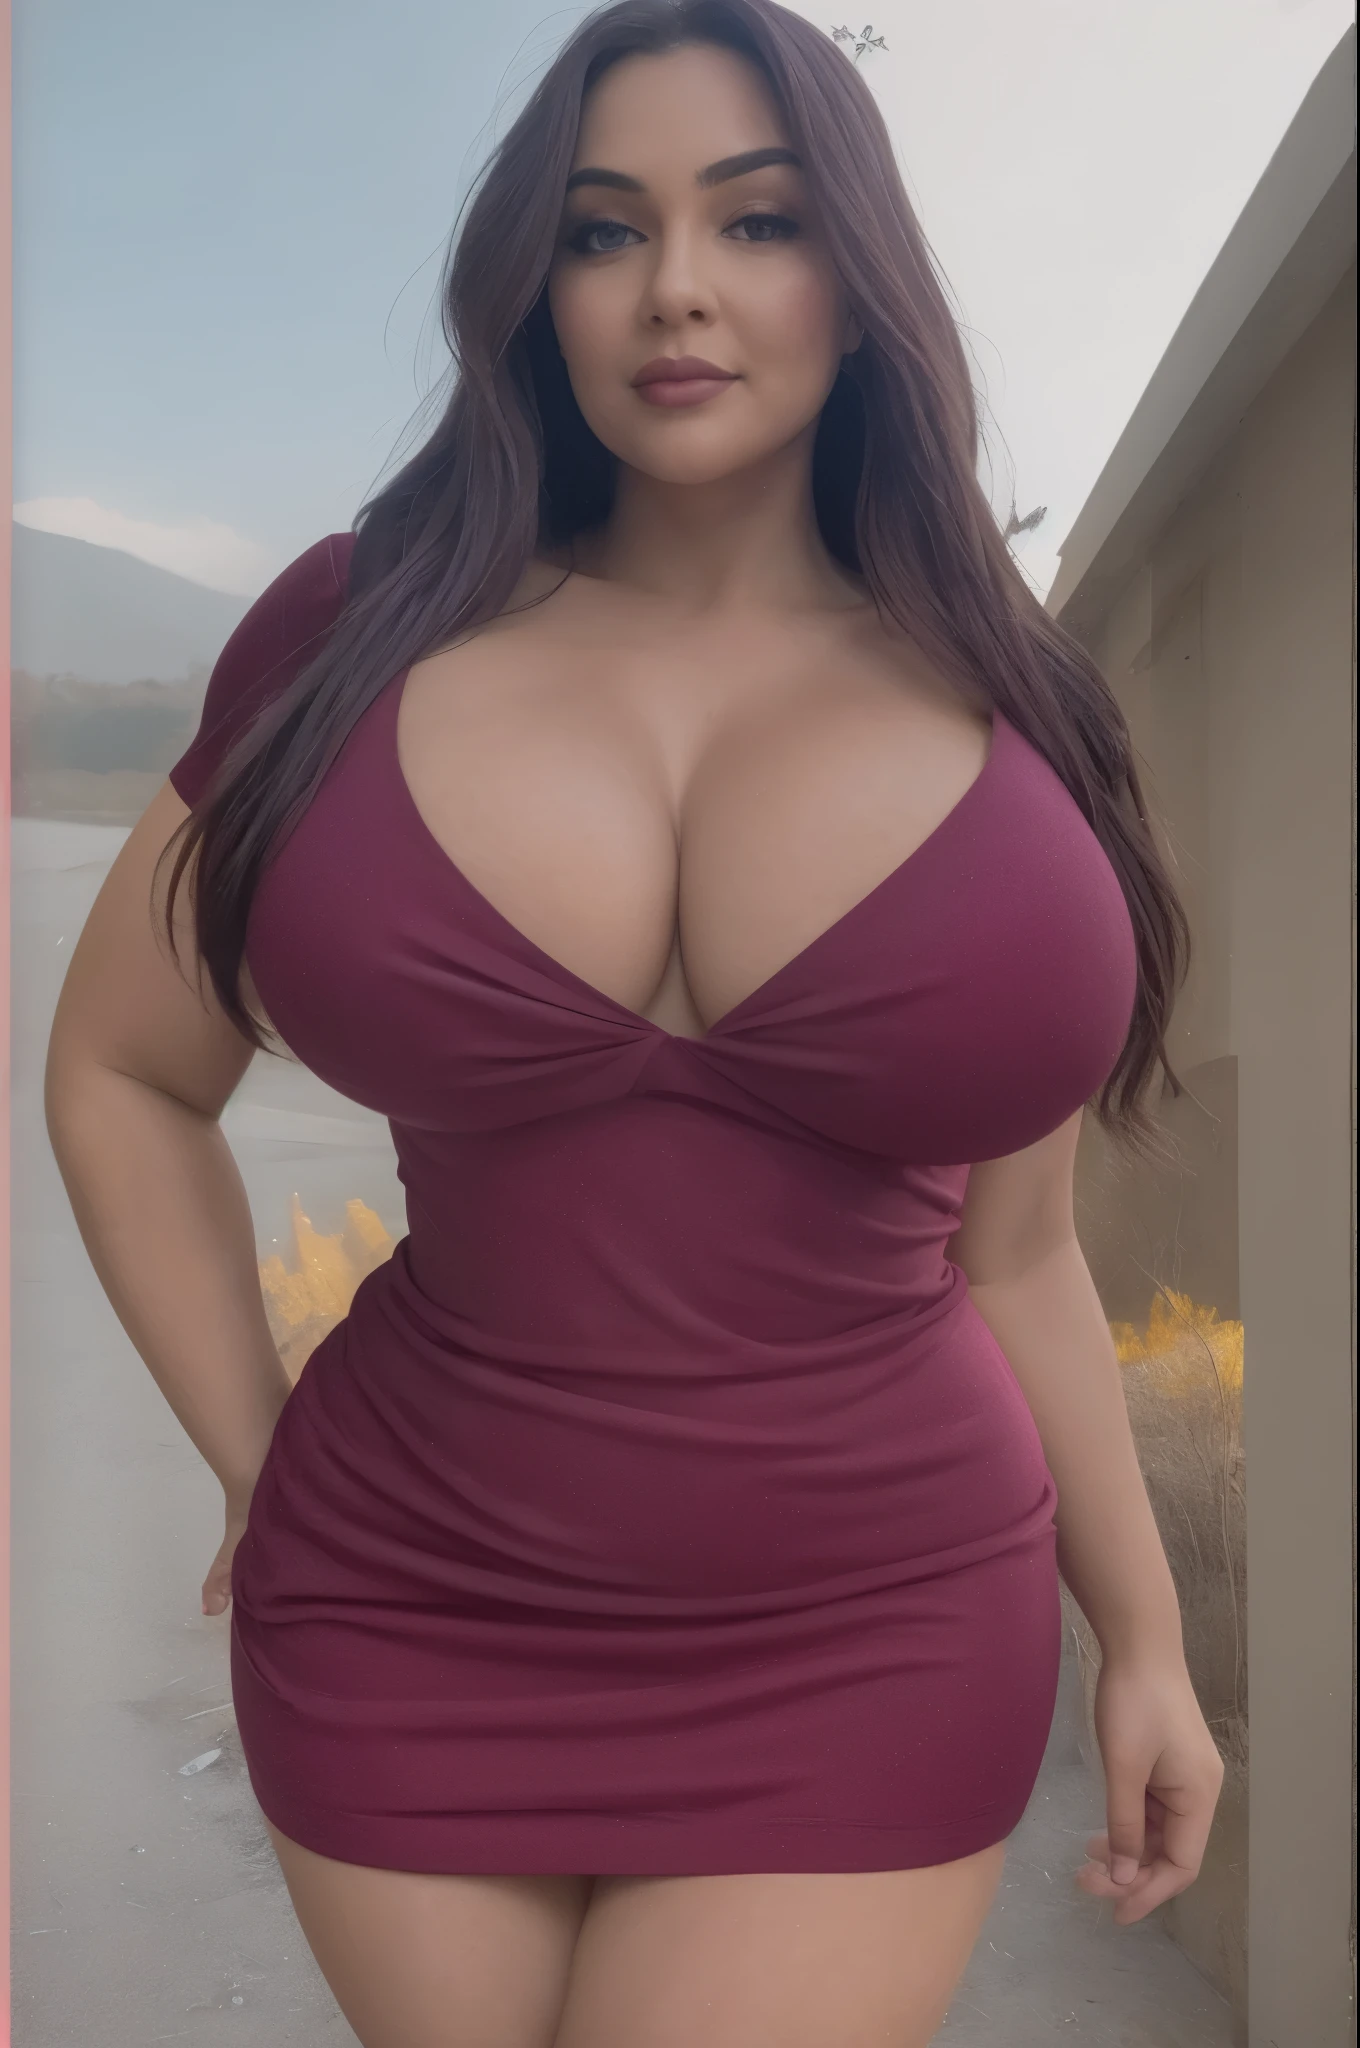 30 year old girl in tight dress, super tight dress, big , round breasts,  wide thighs - SeaArt AI